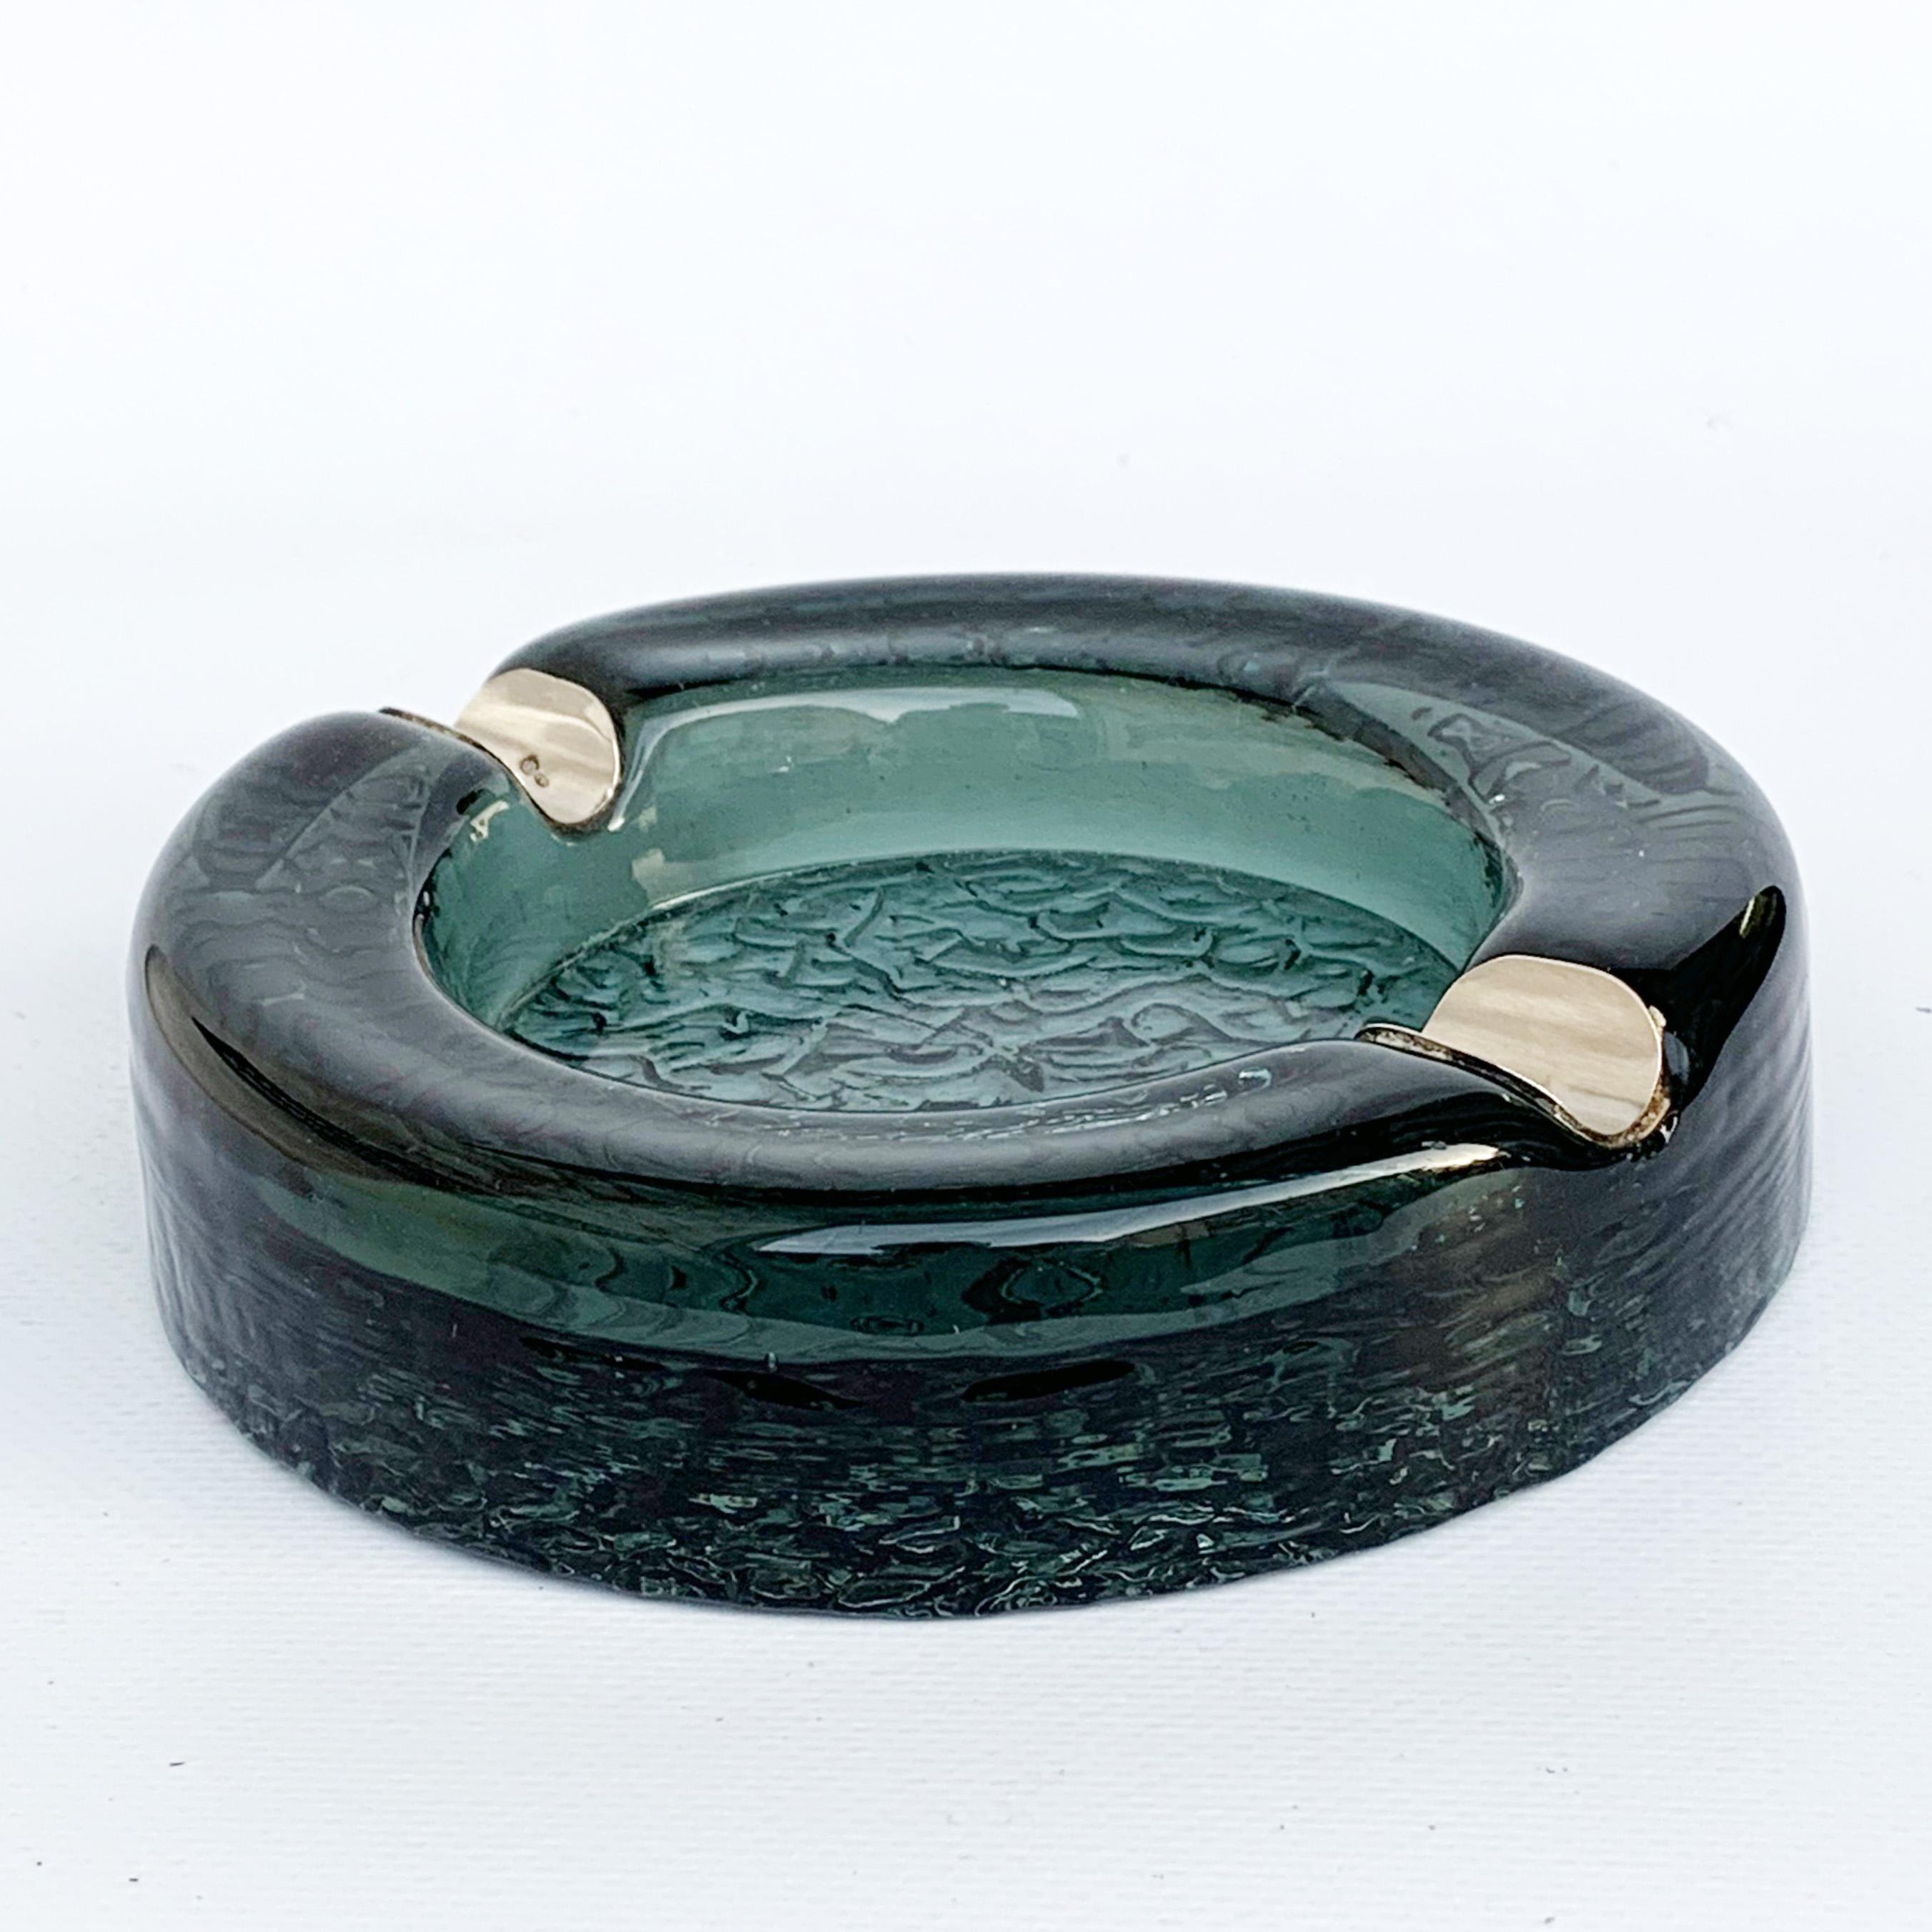 Ashtray in green Murano glass with circular shape, two sterling silver cigarette cases and a magnificent decoration. For smokers like ashtrays but also for non-smokers like candy bowls or saw a few. Available a large collection of Murano glass